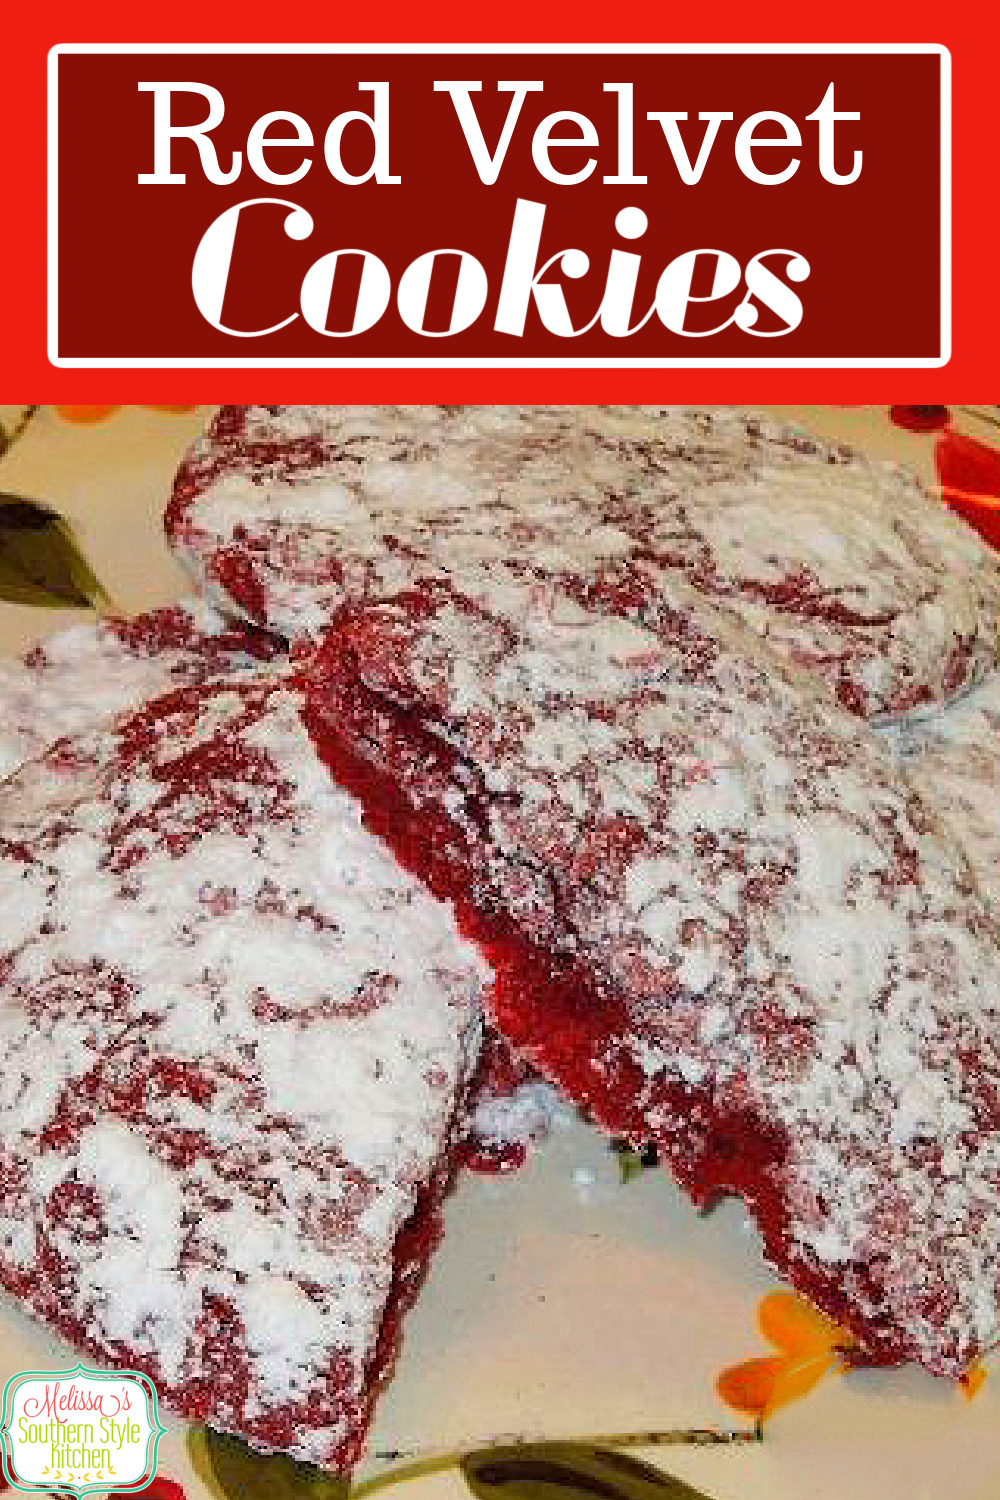 These easy powder sugar coated Red Velvet Cookies will make a spectacular addition to your holiday desserts and cookie swap menu #redvelvetcookies #cookierecipes #christmascookies #redvelvetdesserts #cakemixcookies #christmasbaking #cookierecipes #chocolate via @melissasssk